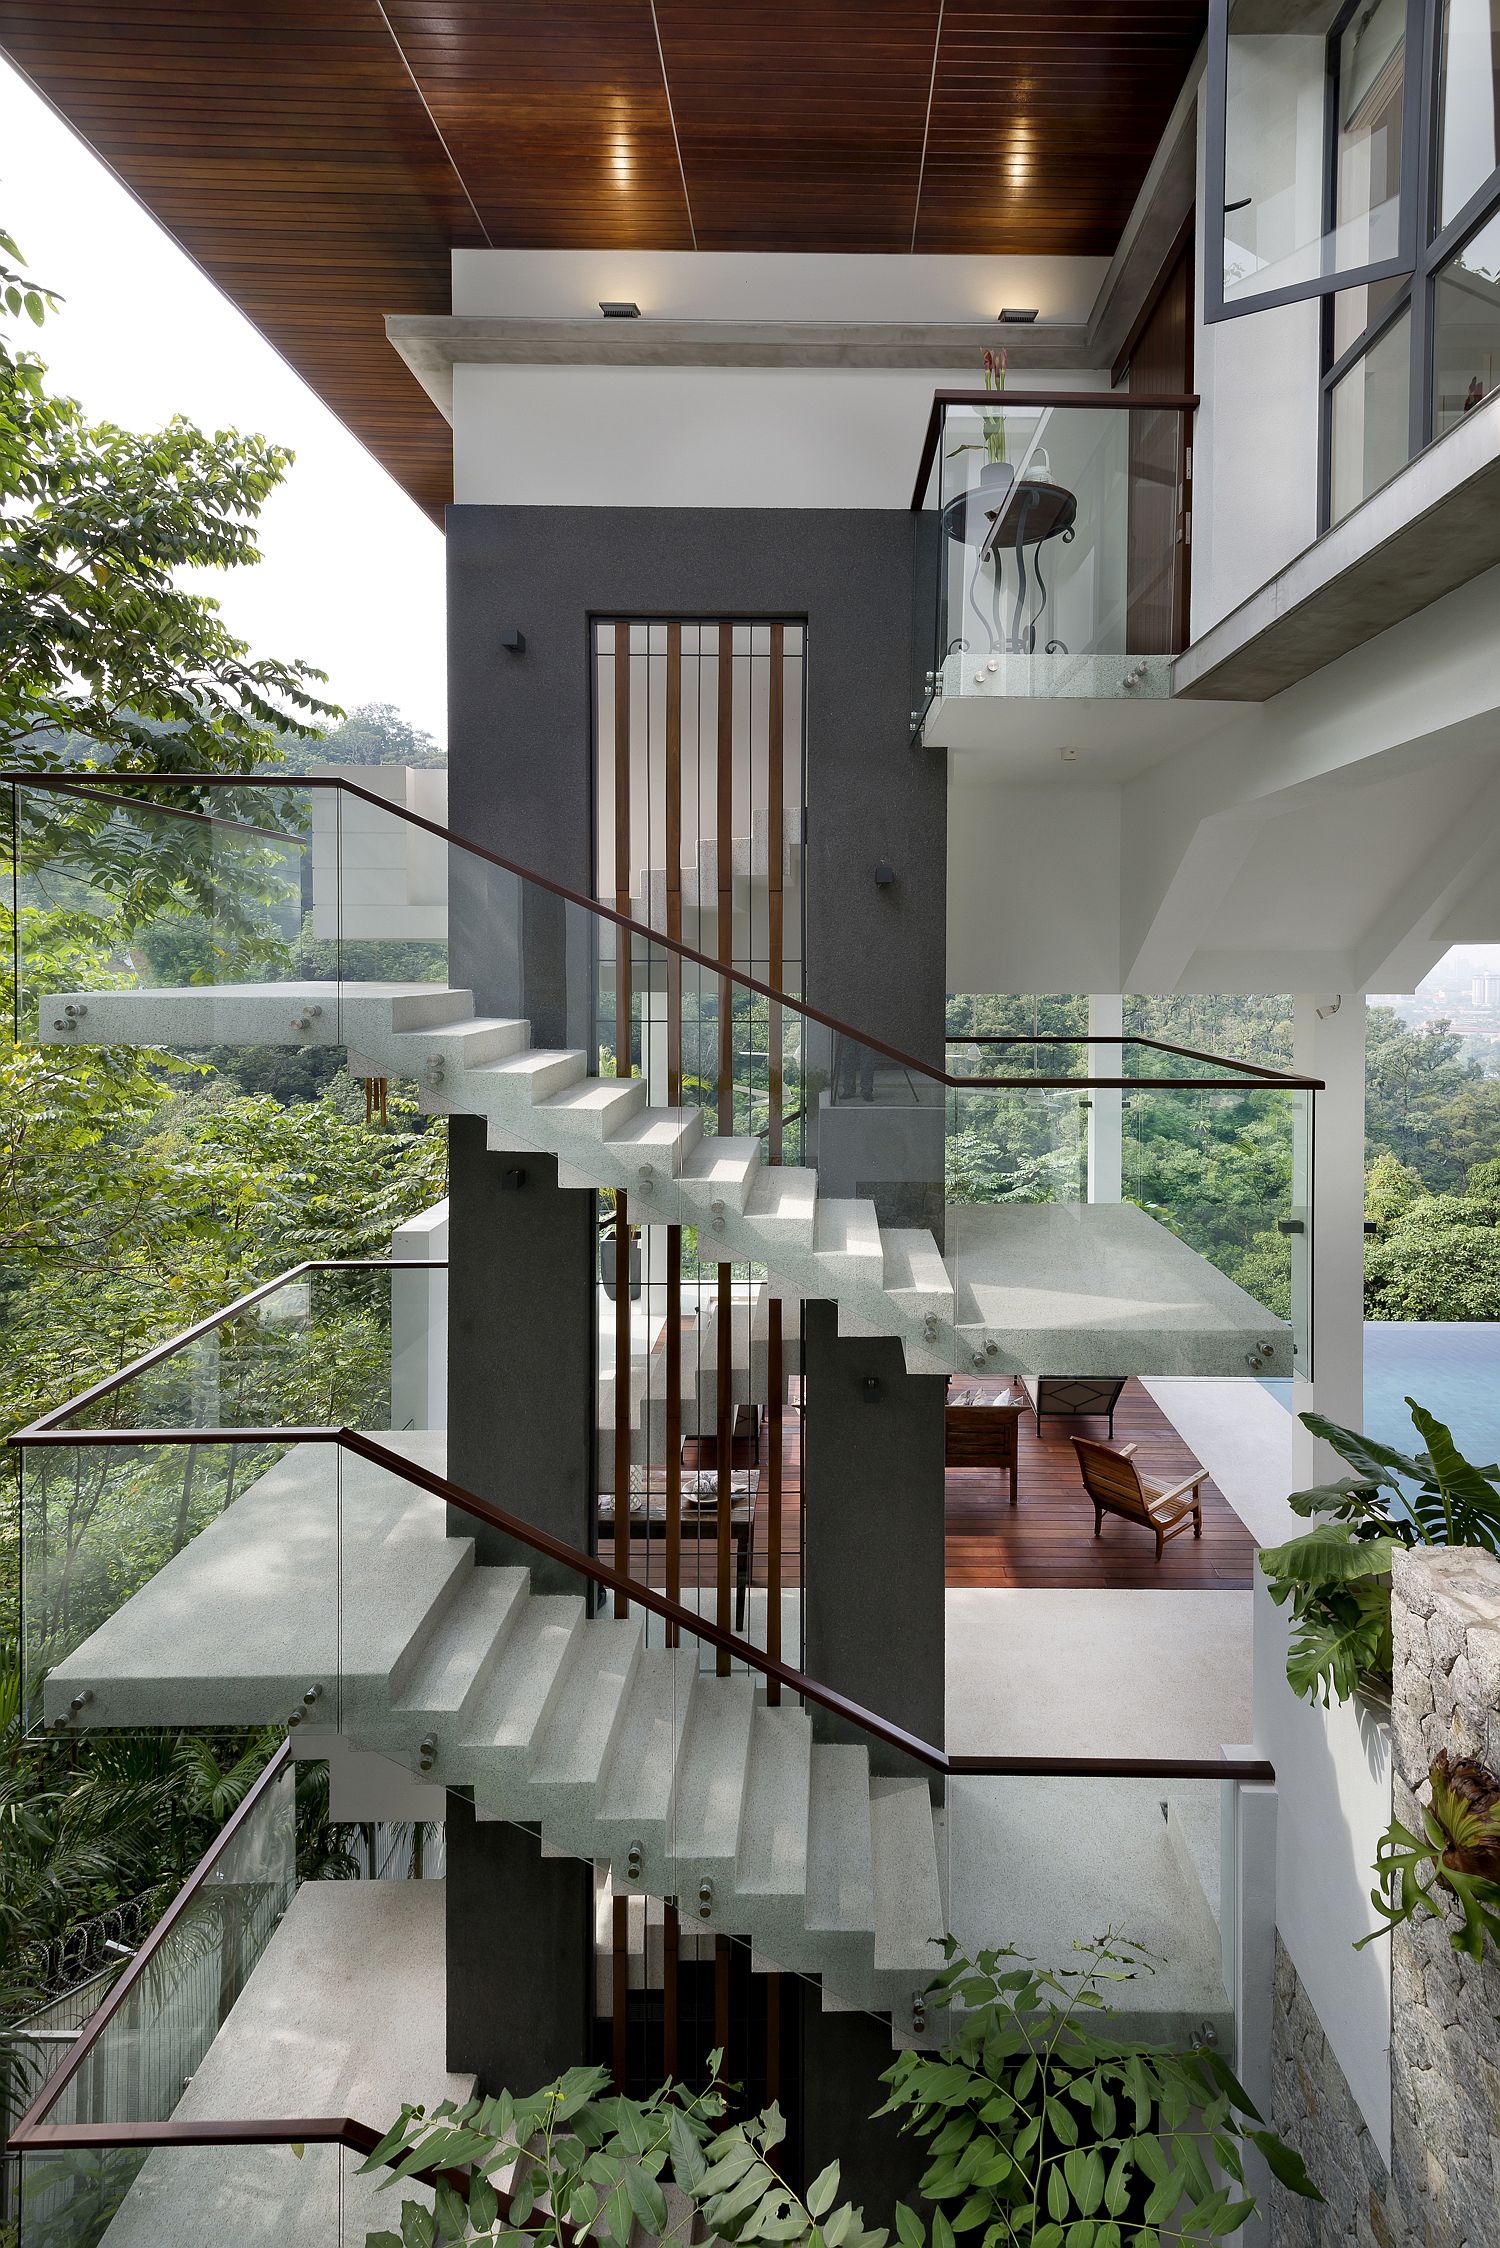 Gorgeous-staircases-connect-the-variors-levels-of-the-house